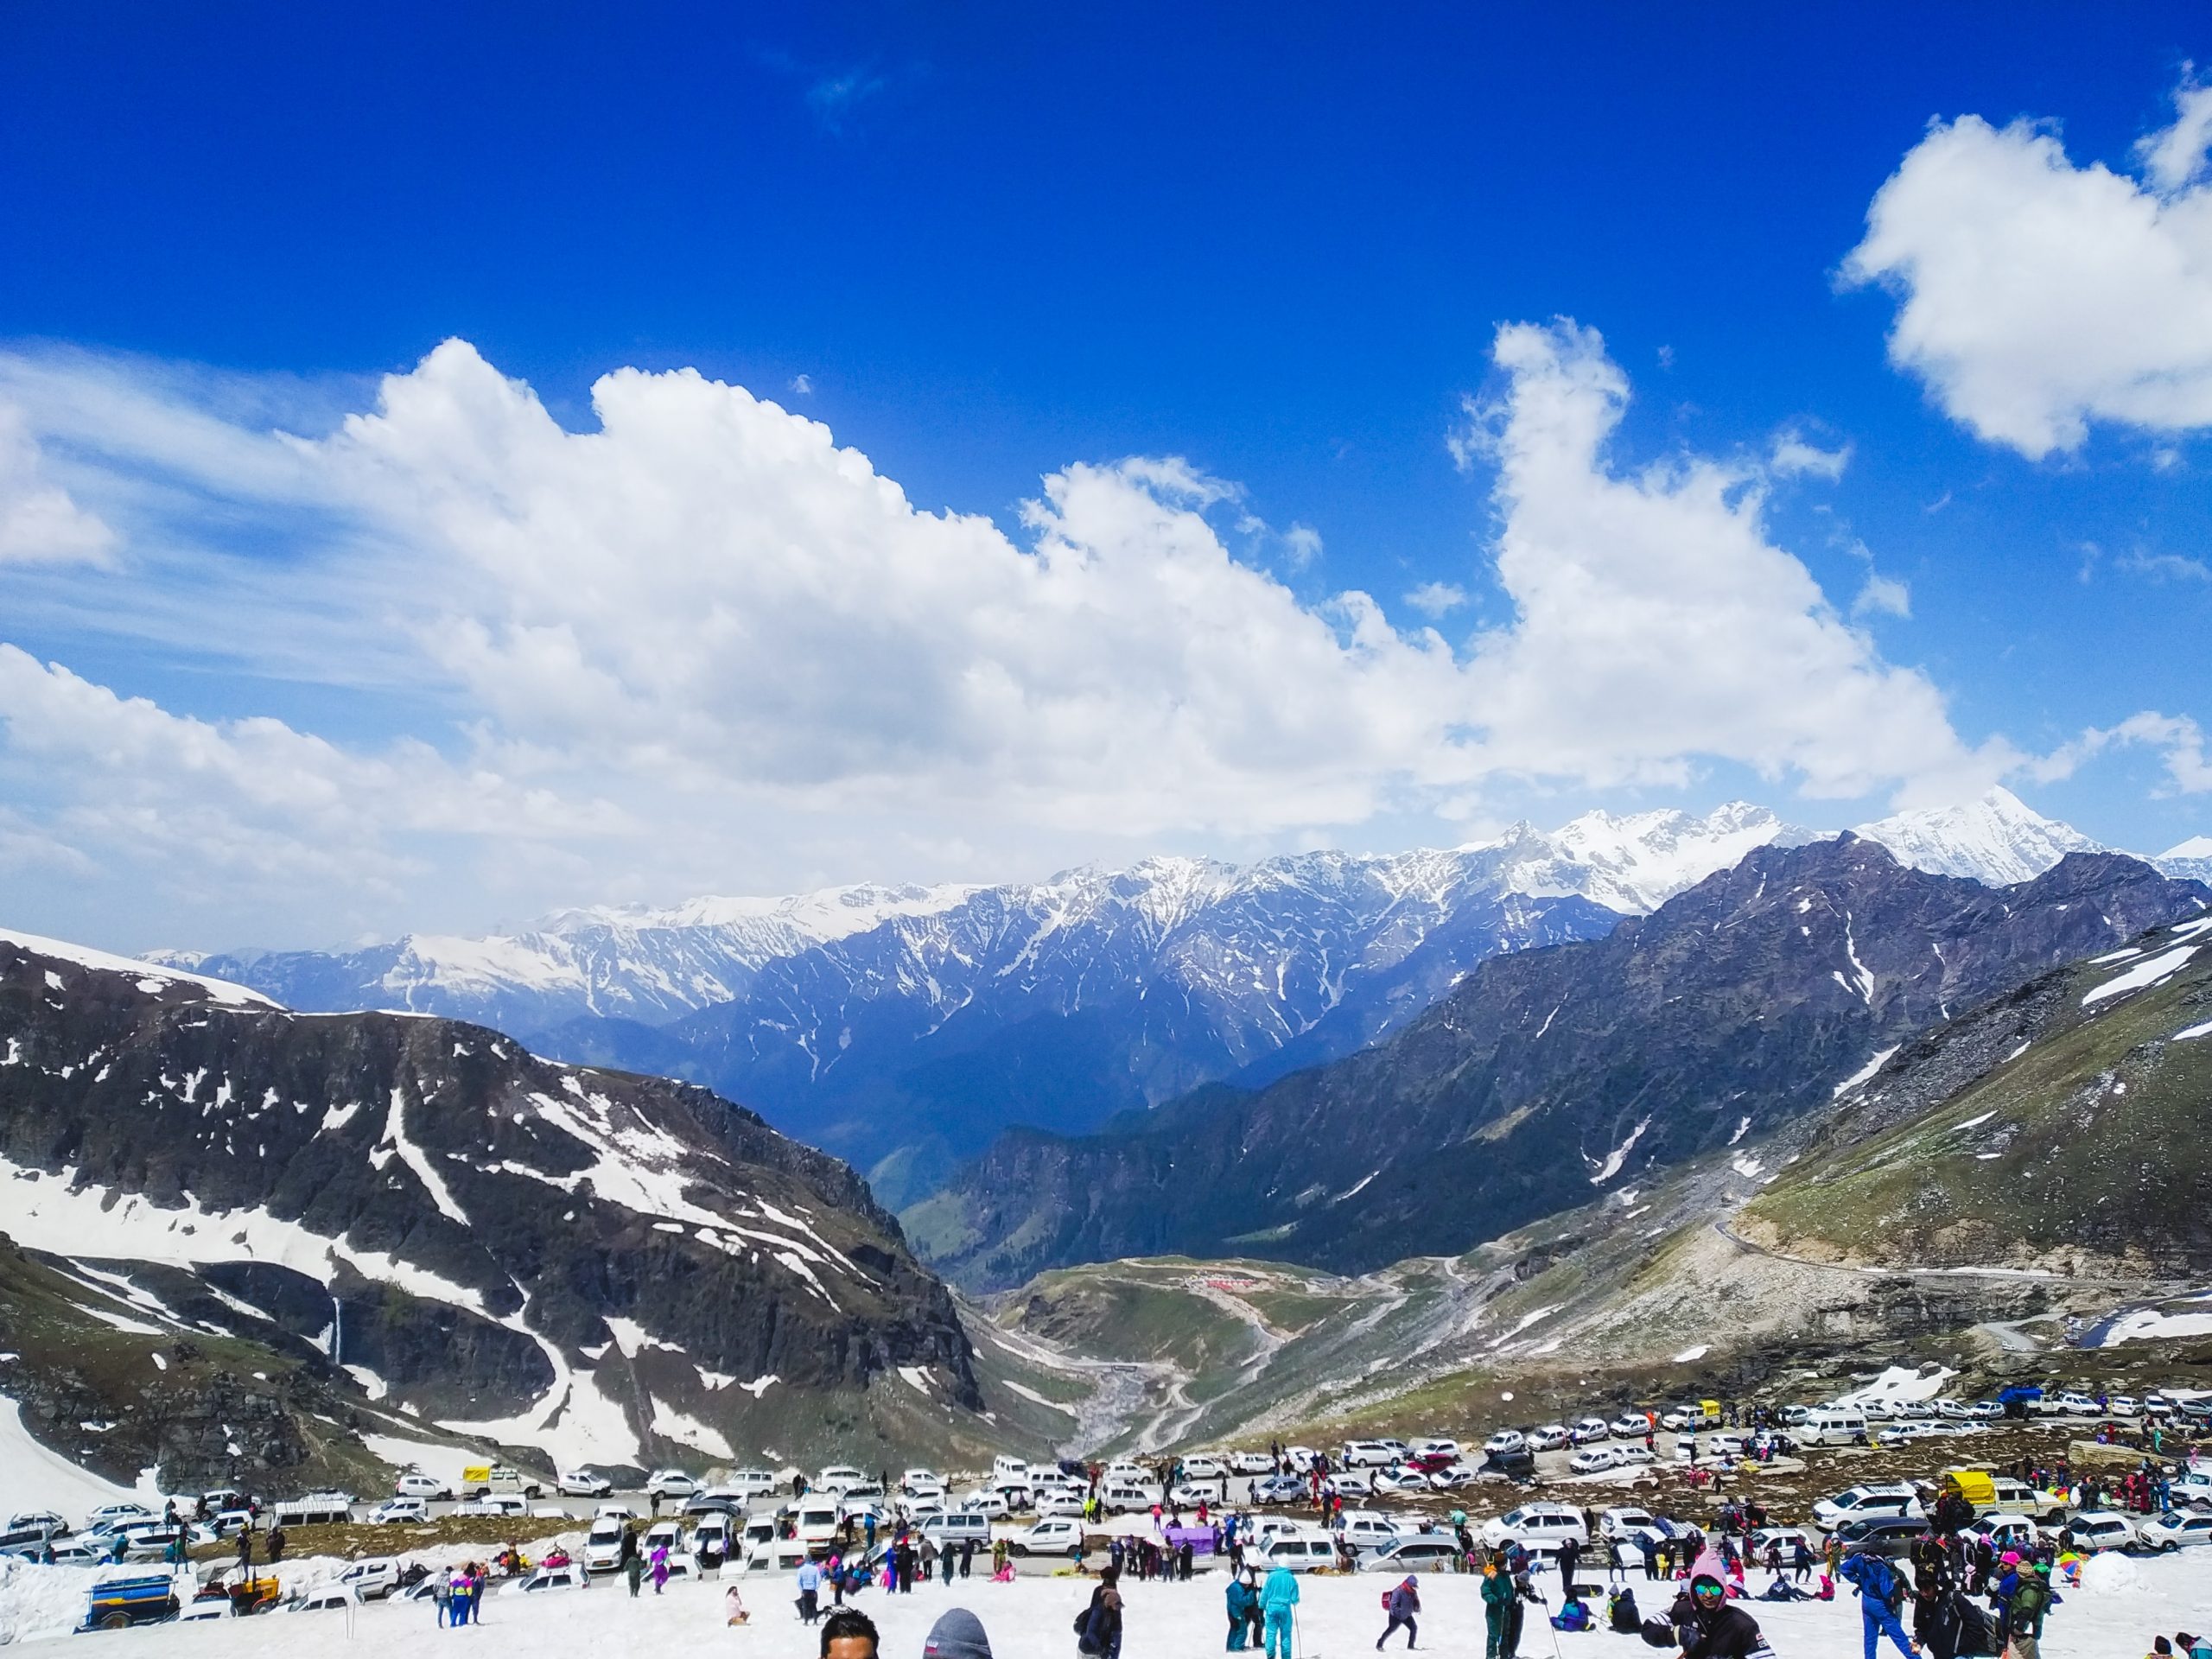 Chandigarh to Shimla and Manali Tour Package: An Unforgettable Journey